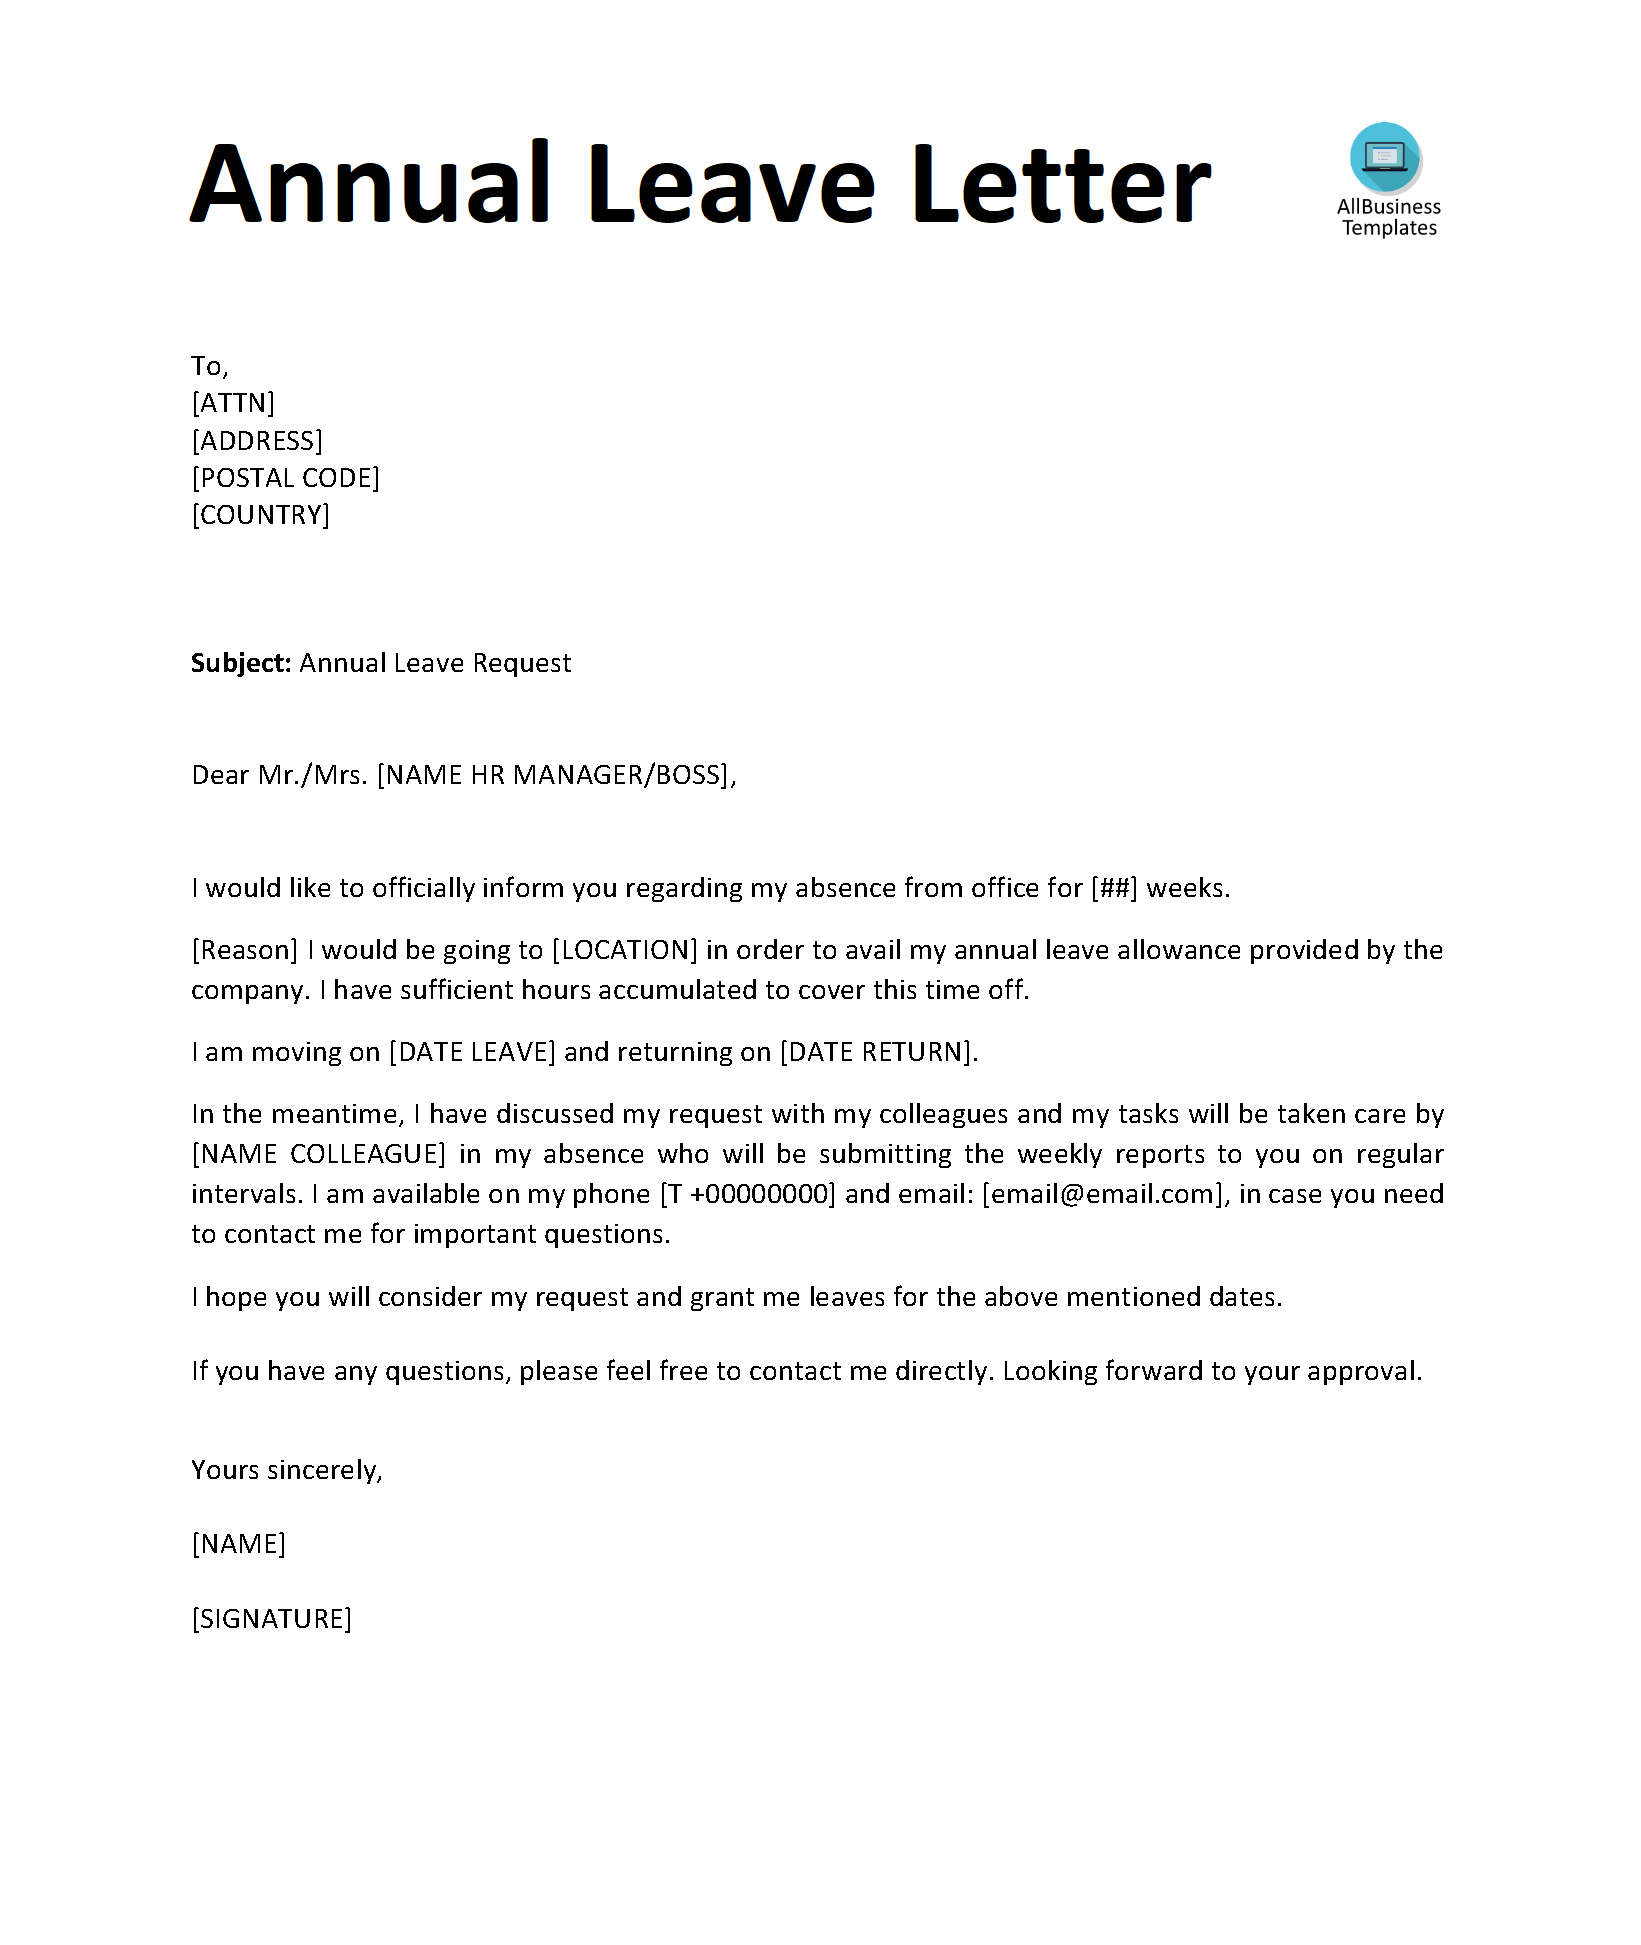 xmas leave application letter